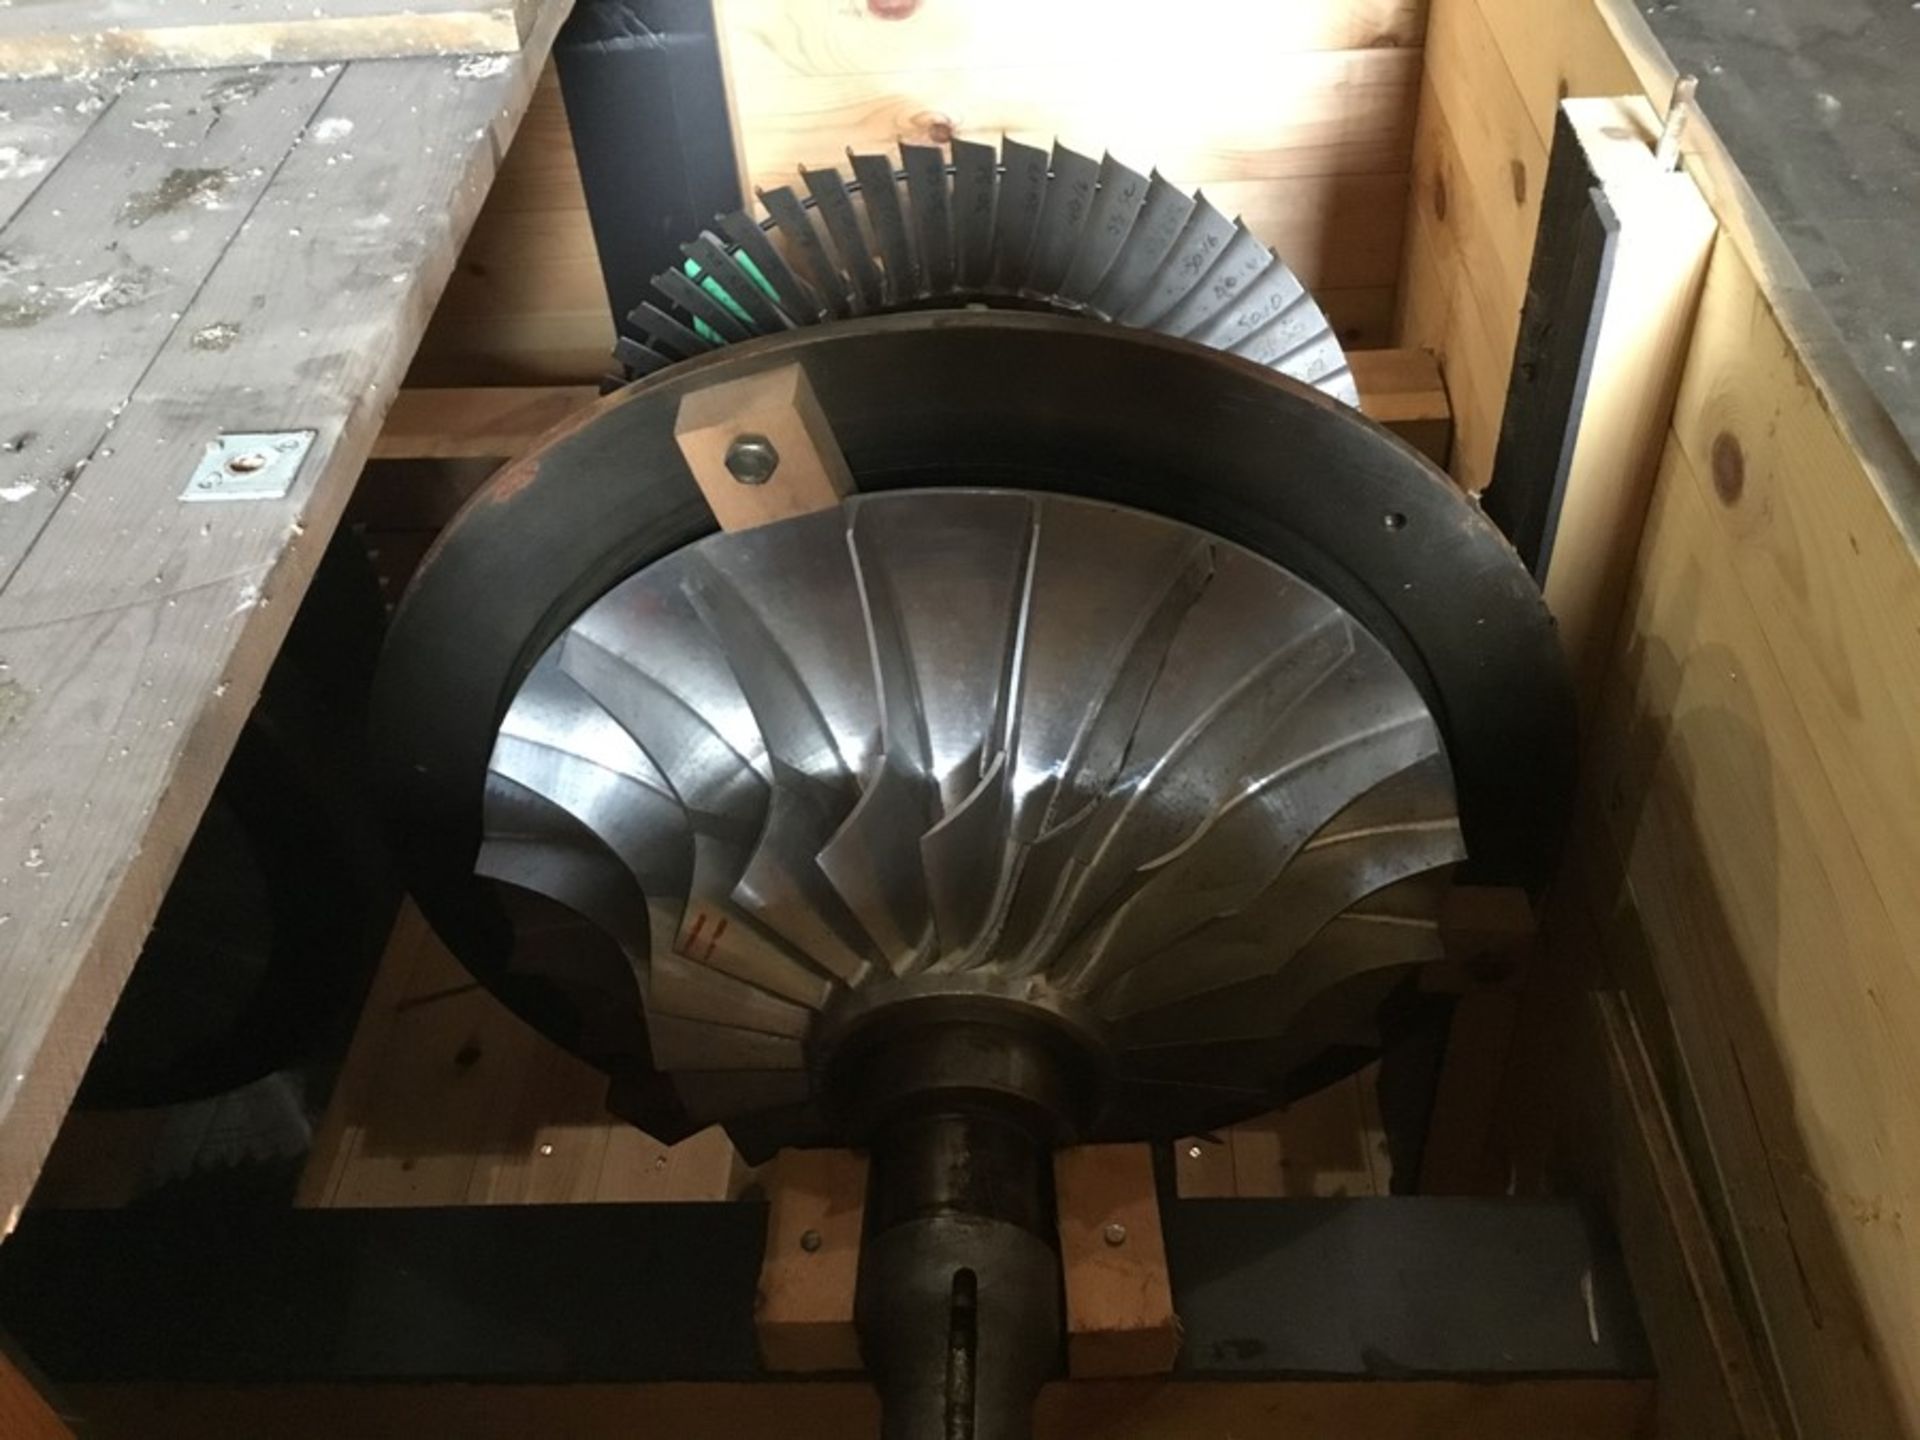 Box containing qty1 BBV VTR400 Type HTLT207301 P1M7 Turbo rotor Refurbished but held in long term - Image 18 of 18